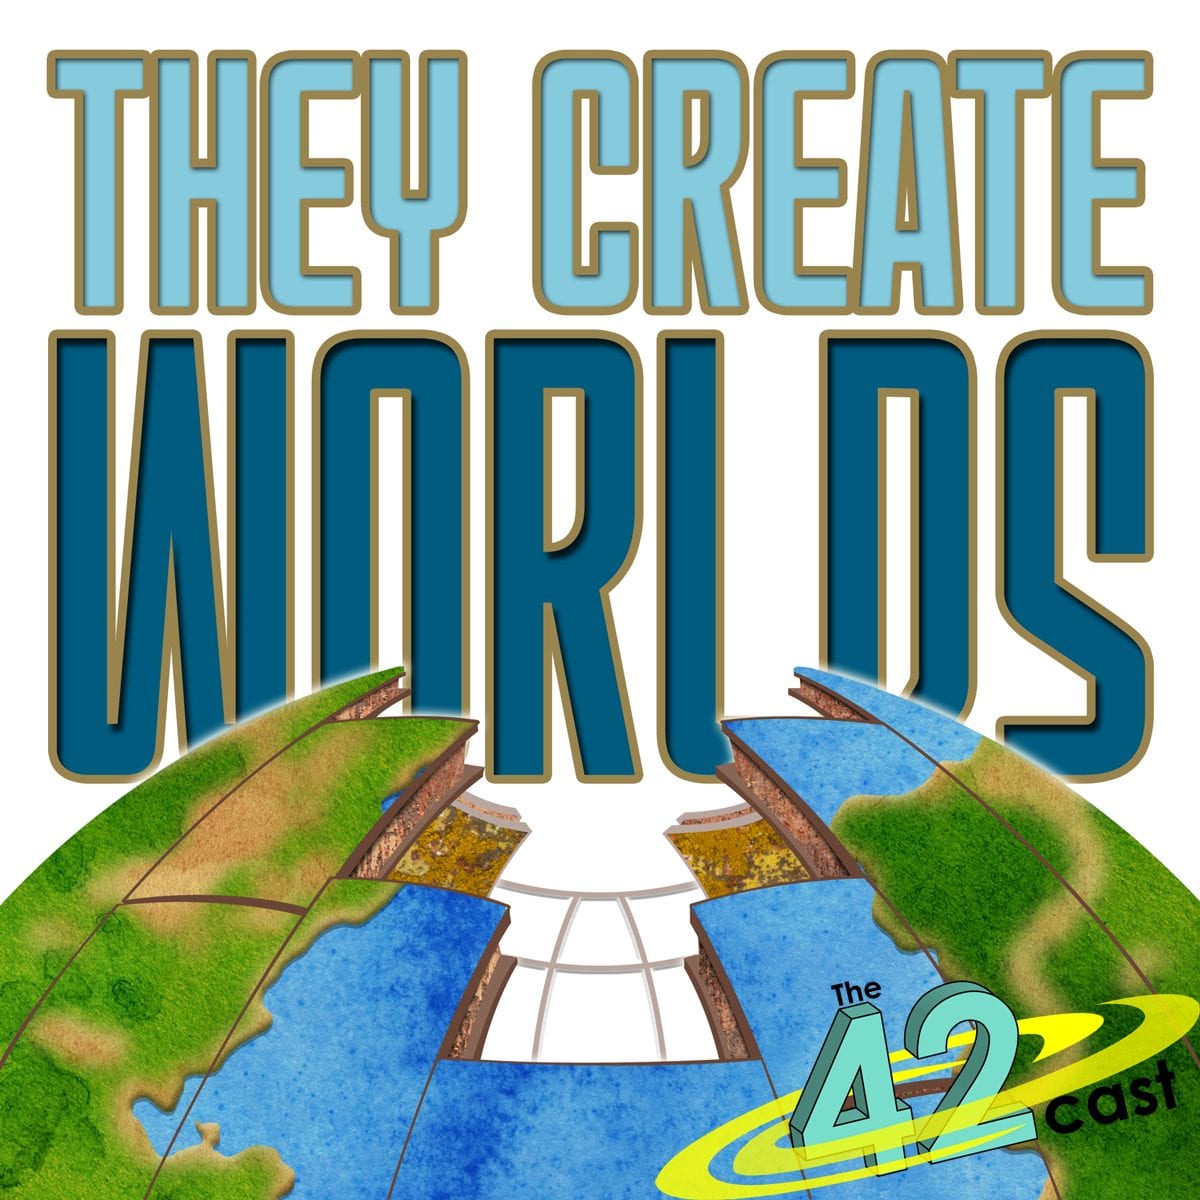 They_Create_Worlds